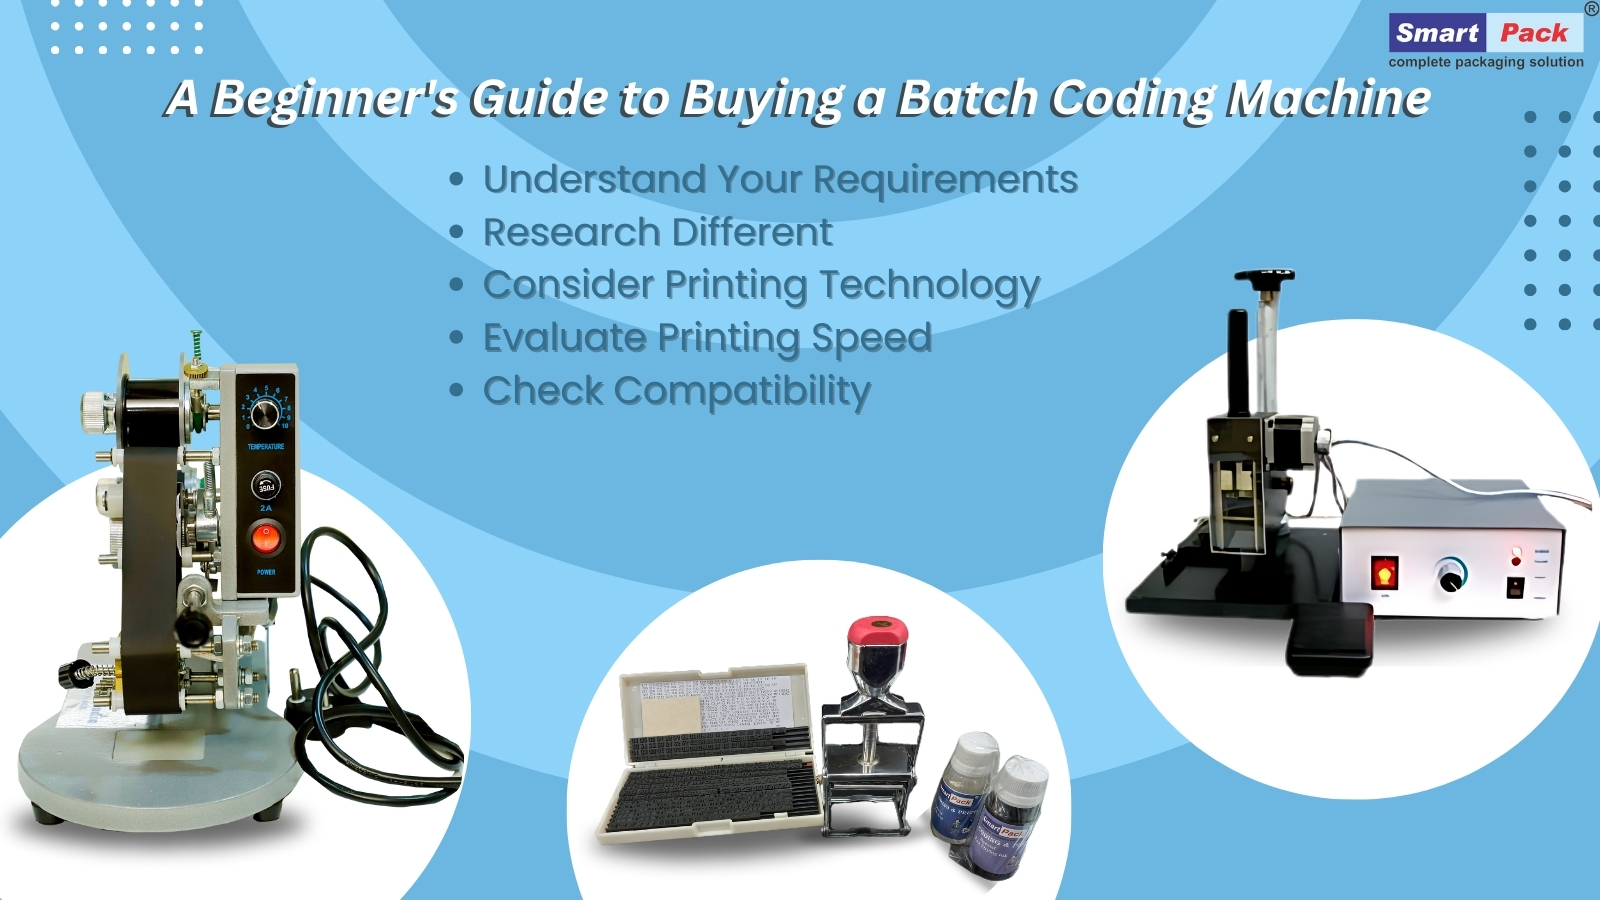 A Beginner’s Guide to Buying a Batch Coding Machine